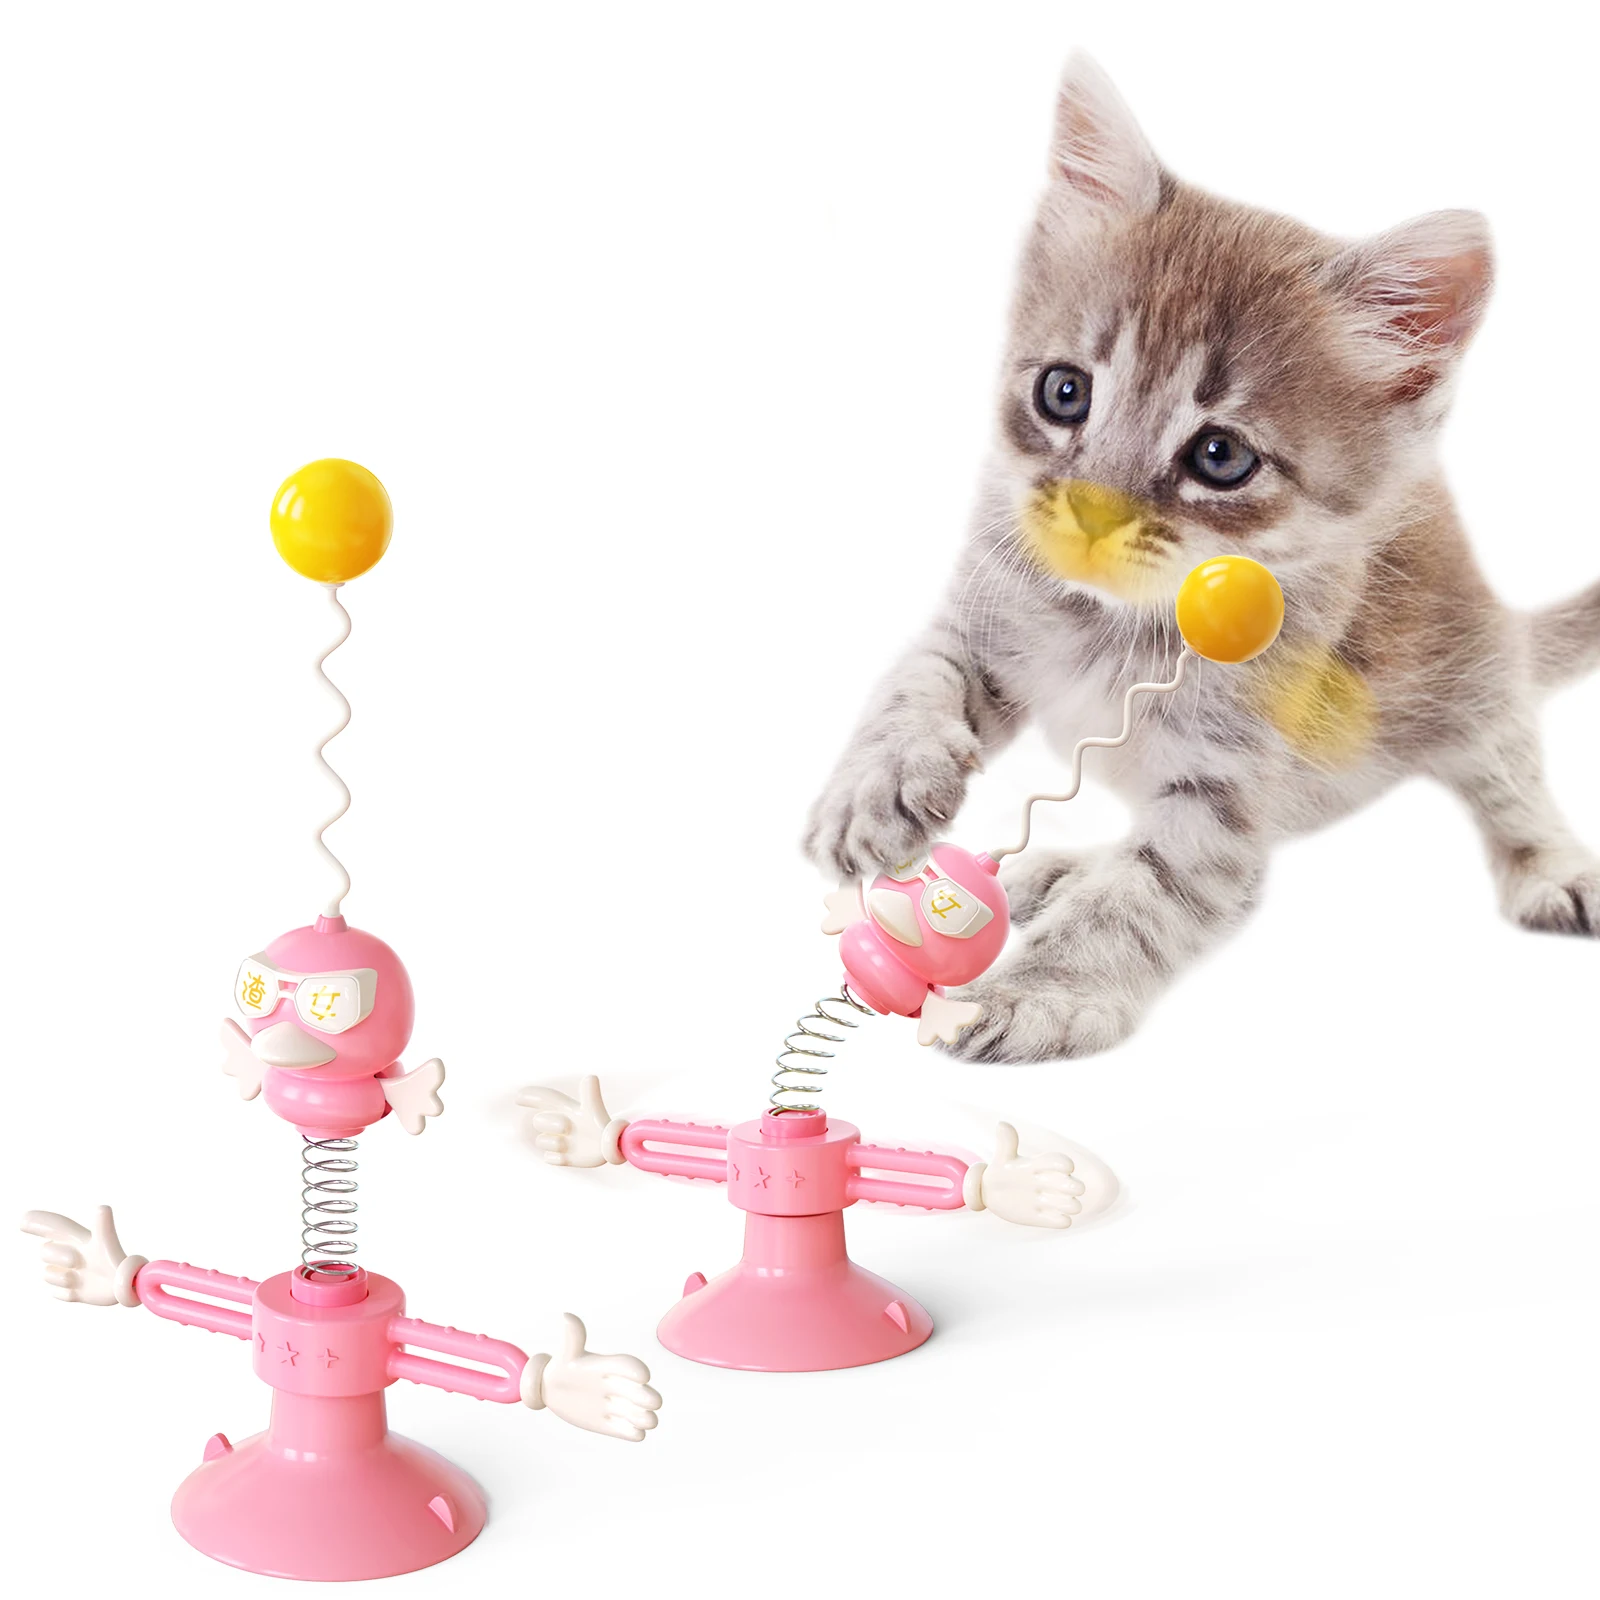 

Cat toy windmill turntable spring bird tease cat stick with suction cup tumbler toy cat self hi artifact pet products, Mix color